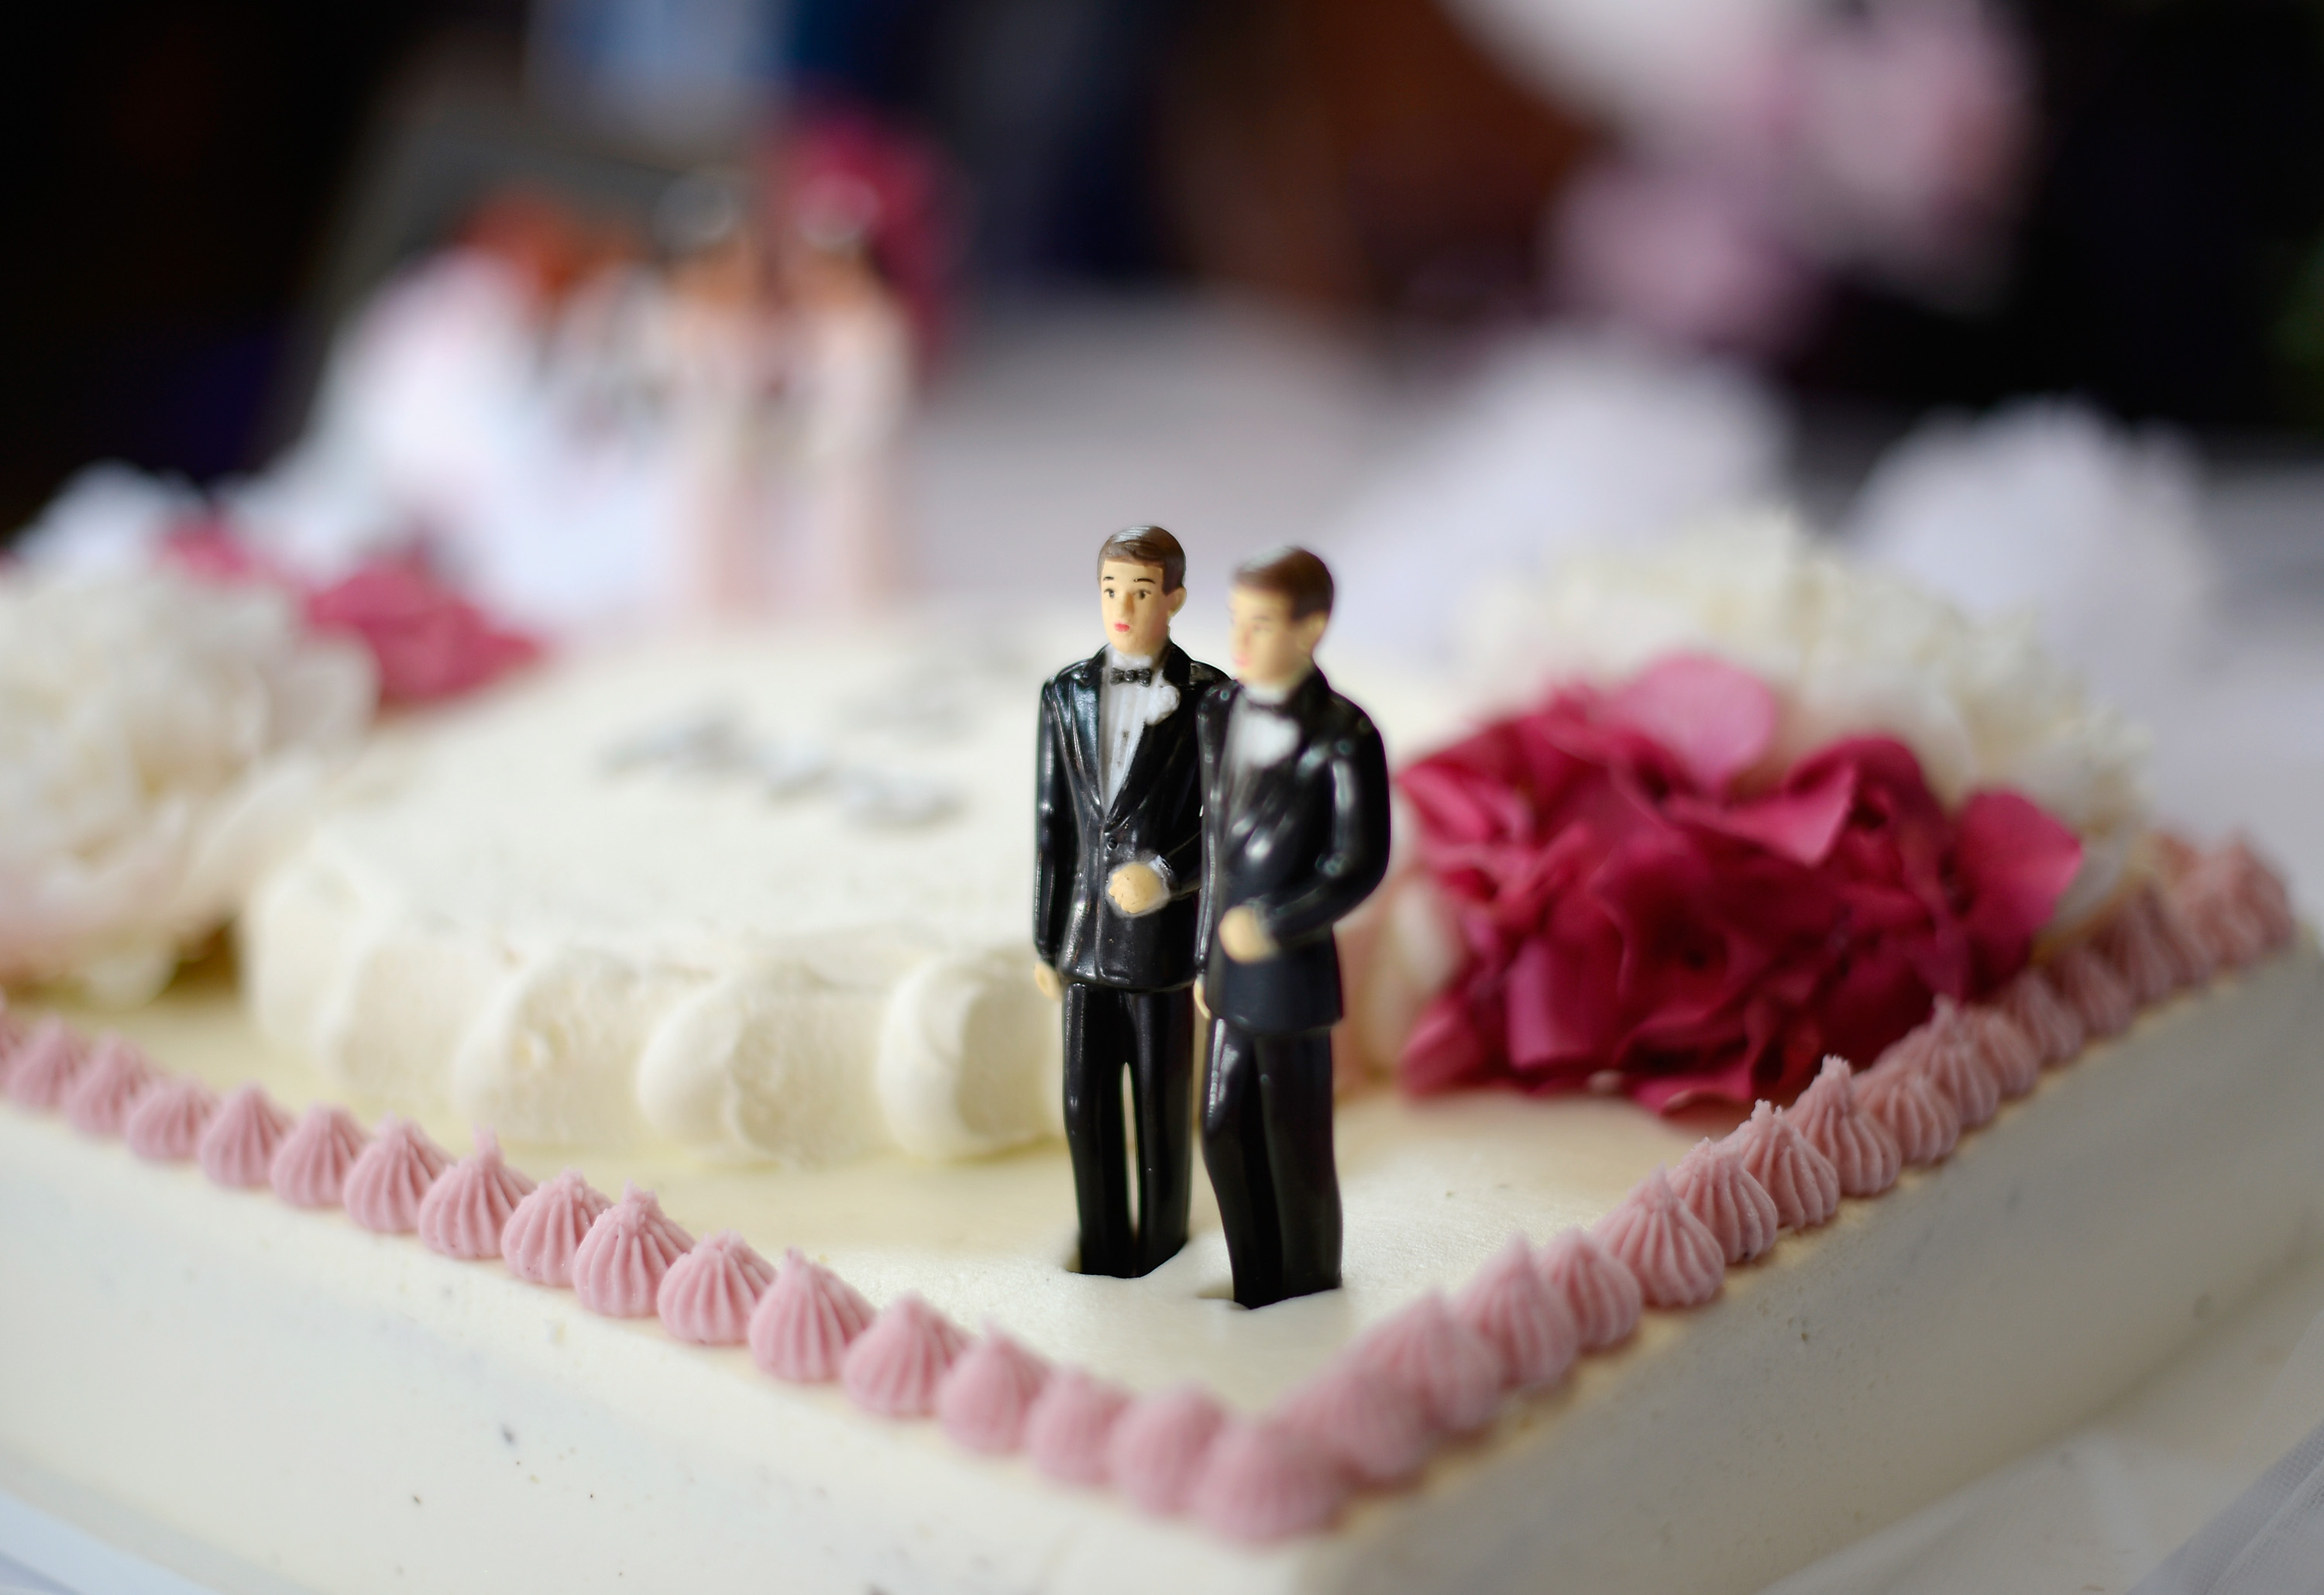 A wedding cake for same-sex couples at a wedding celebration at The Abbey on July 1, 2013 in West Hollywood, California. (Kevork Djansezian—Getty Images)